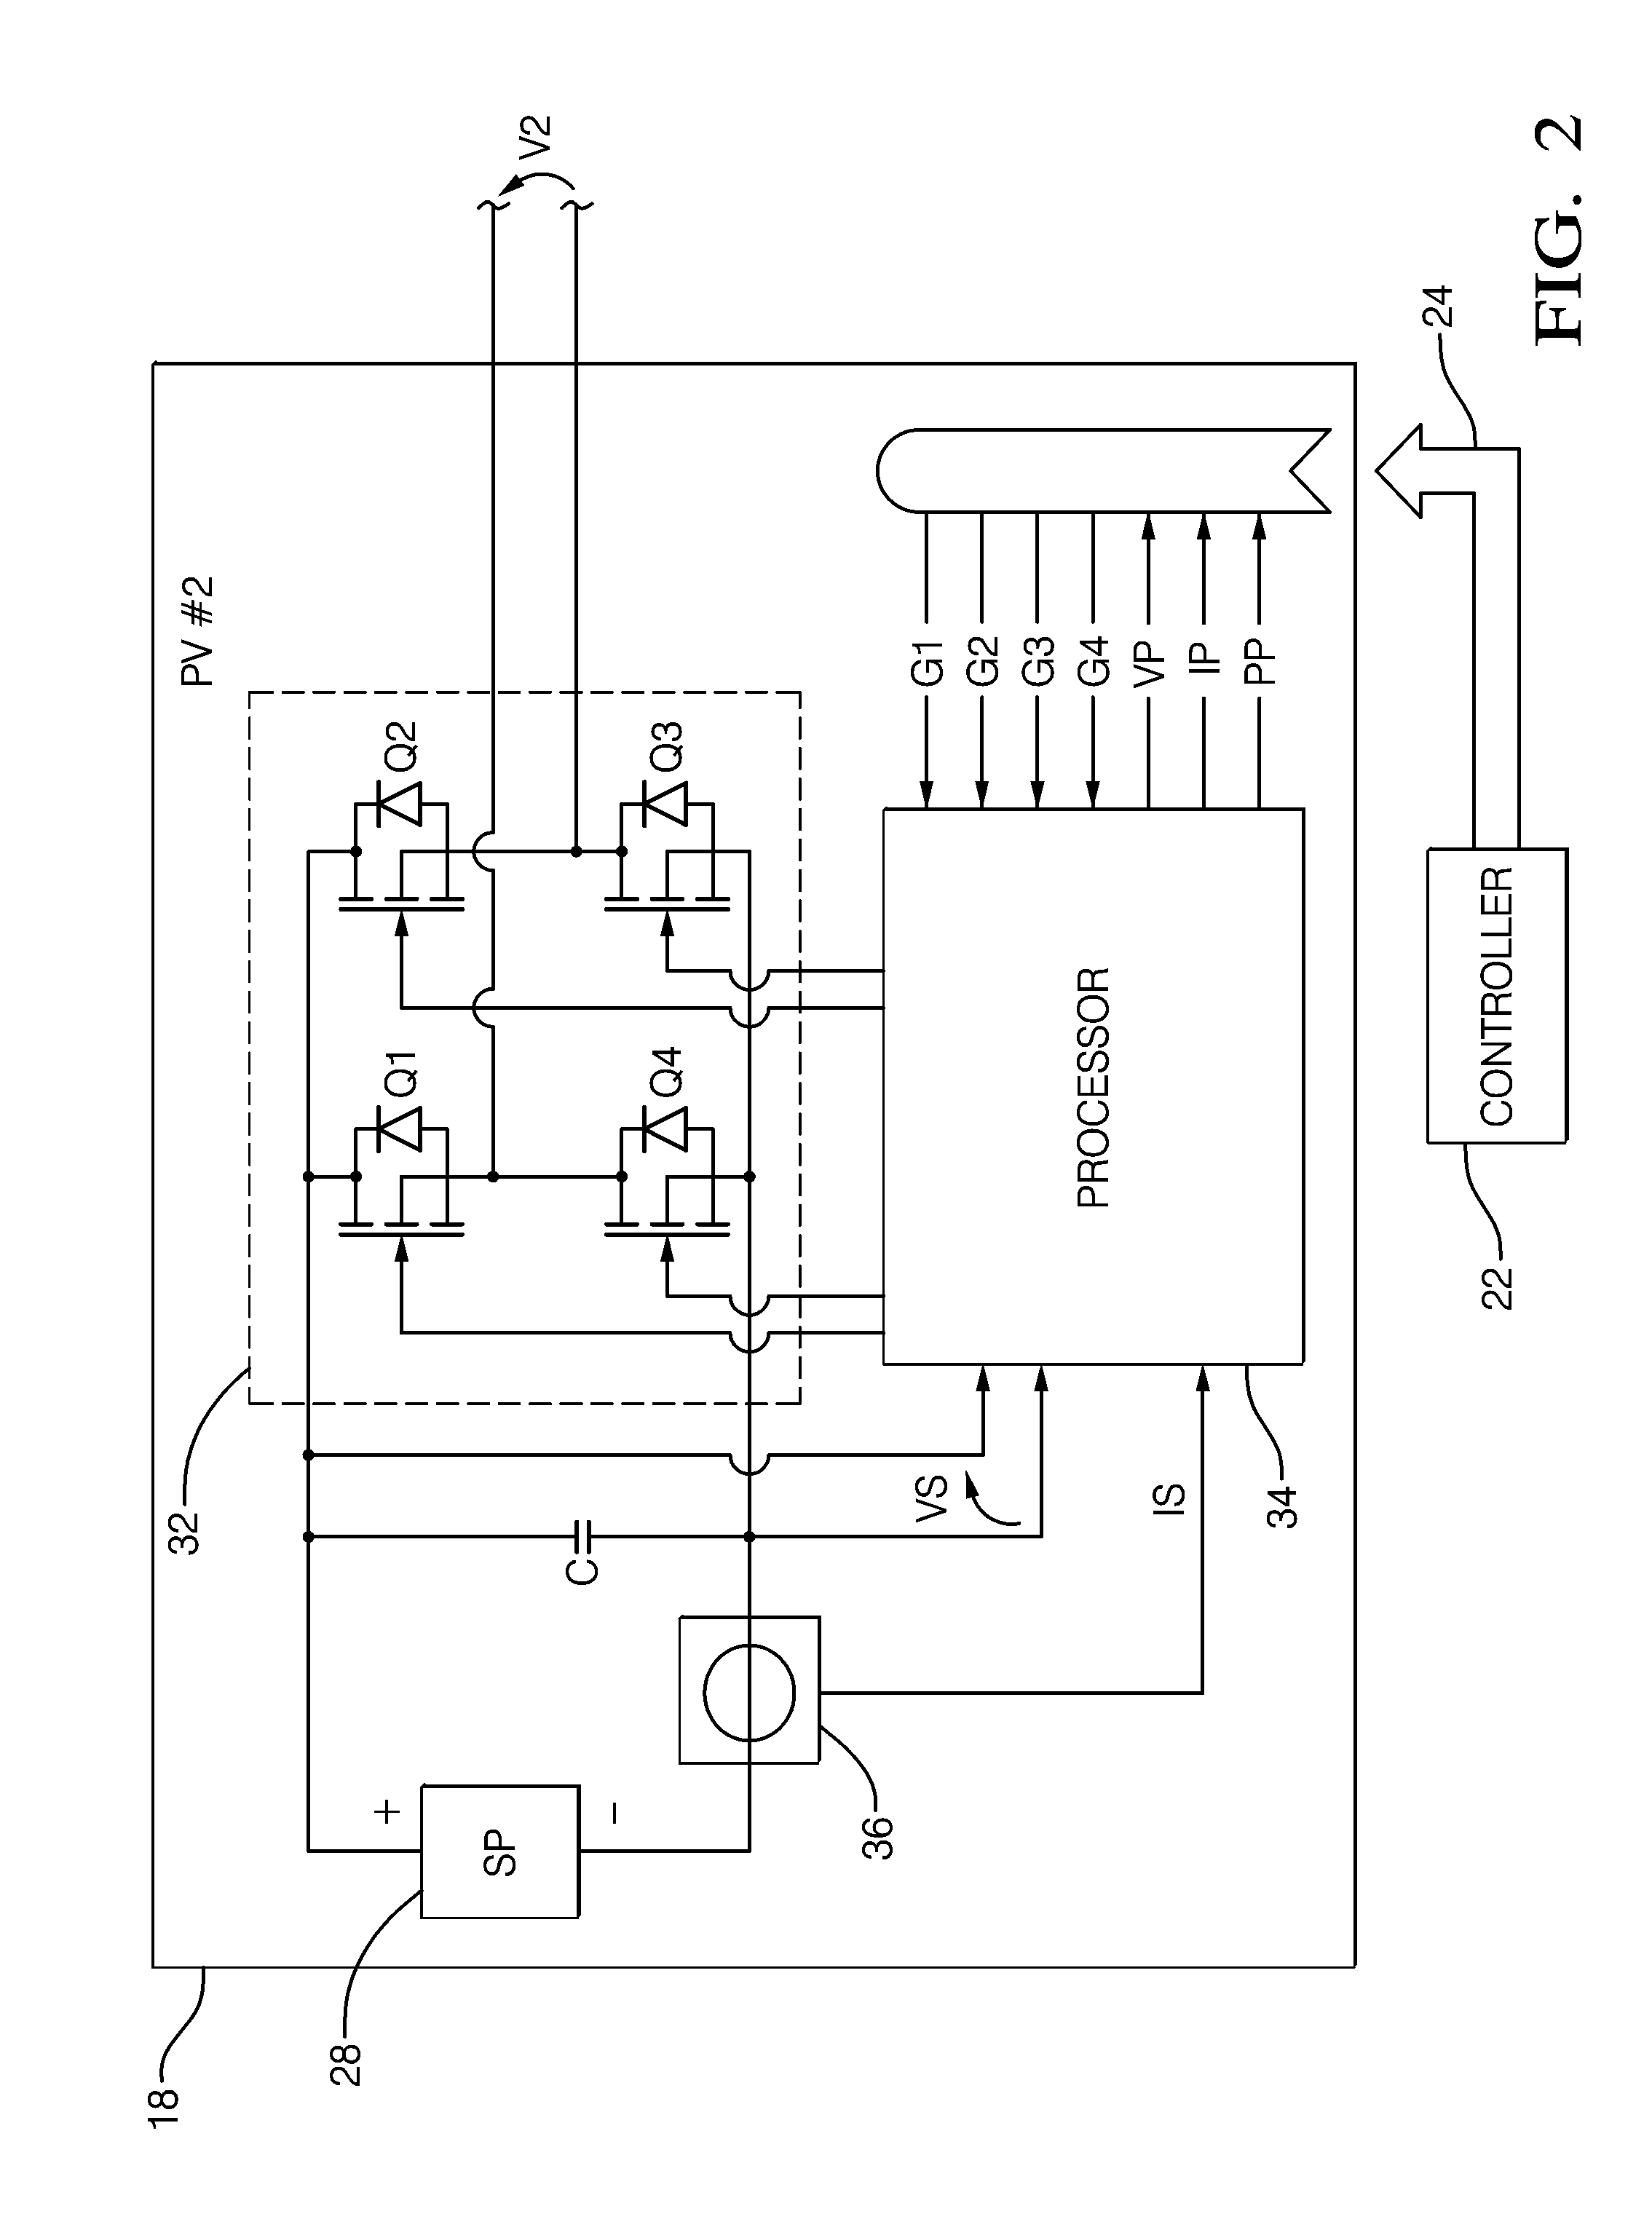 Cascaded multilevel inverter and method for operating photovoltaic cells at a maximum power point